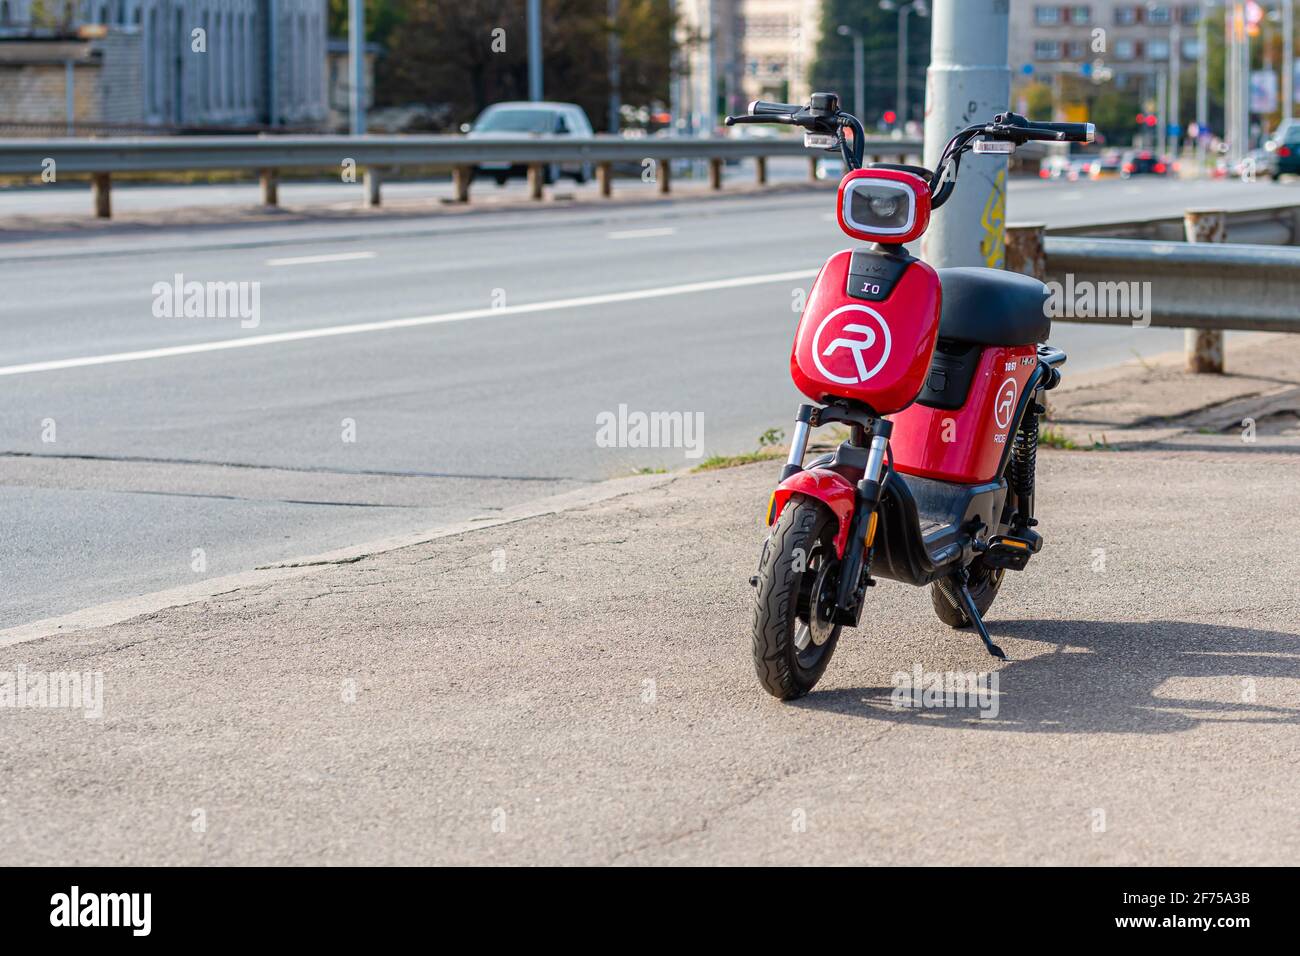 Riga, Latvia - September 30, 2020: sharing and rental service RIDE electric  bike Xiaomi HIMO T1 parked on sidewalk Stock Photo - Alamy